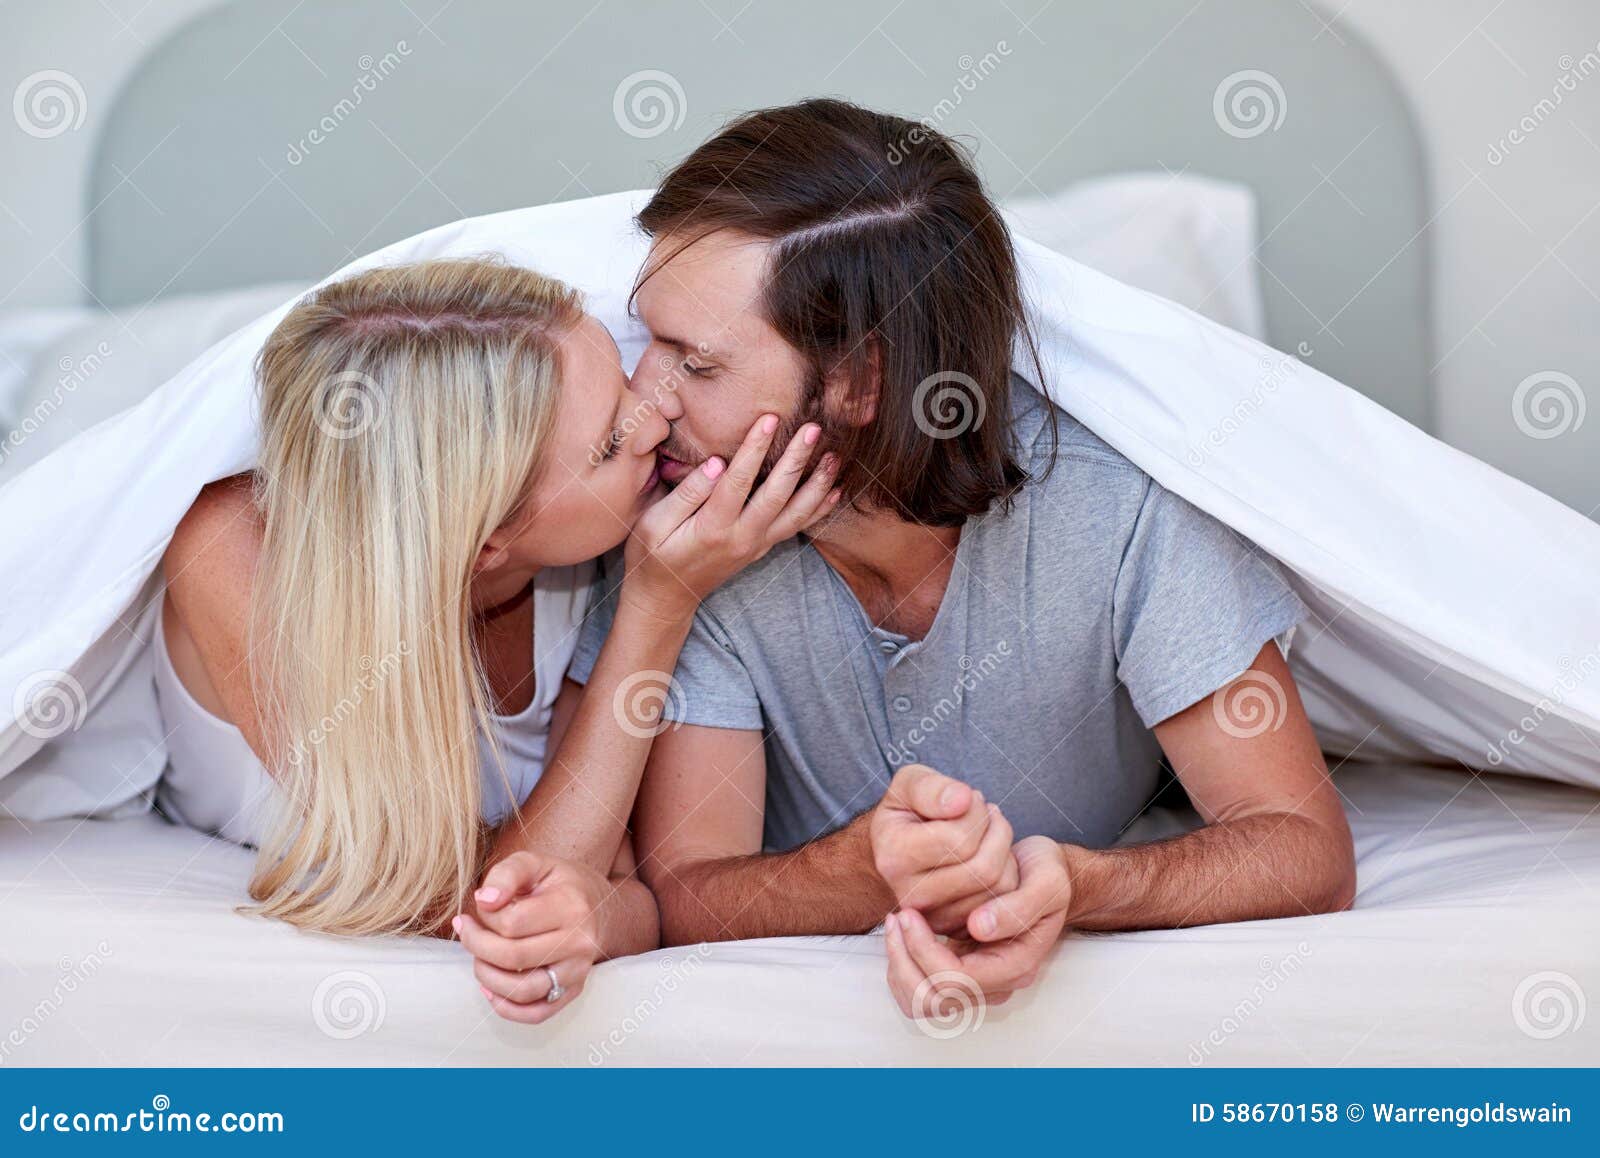 Couple Kiss Bedroom Stock Photo Image Of Love Cuddle 58670158